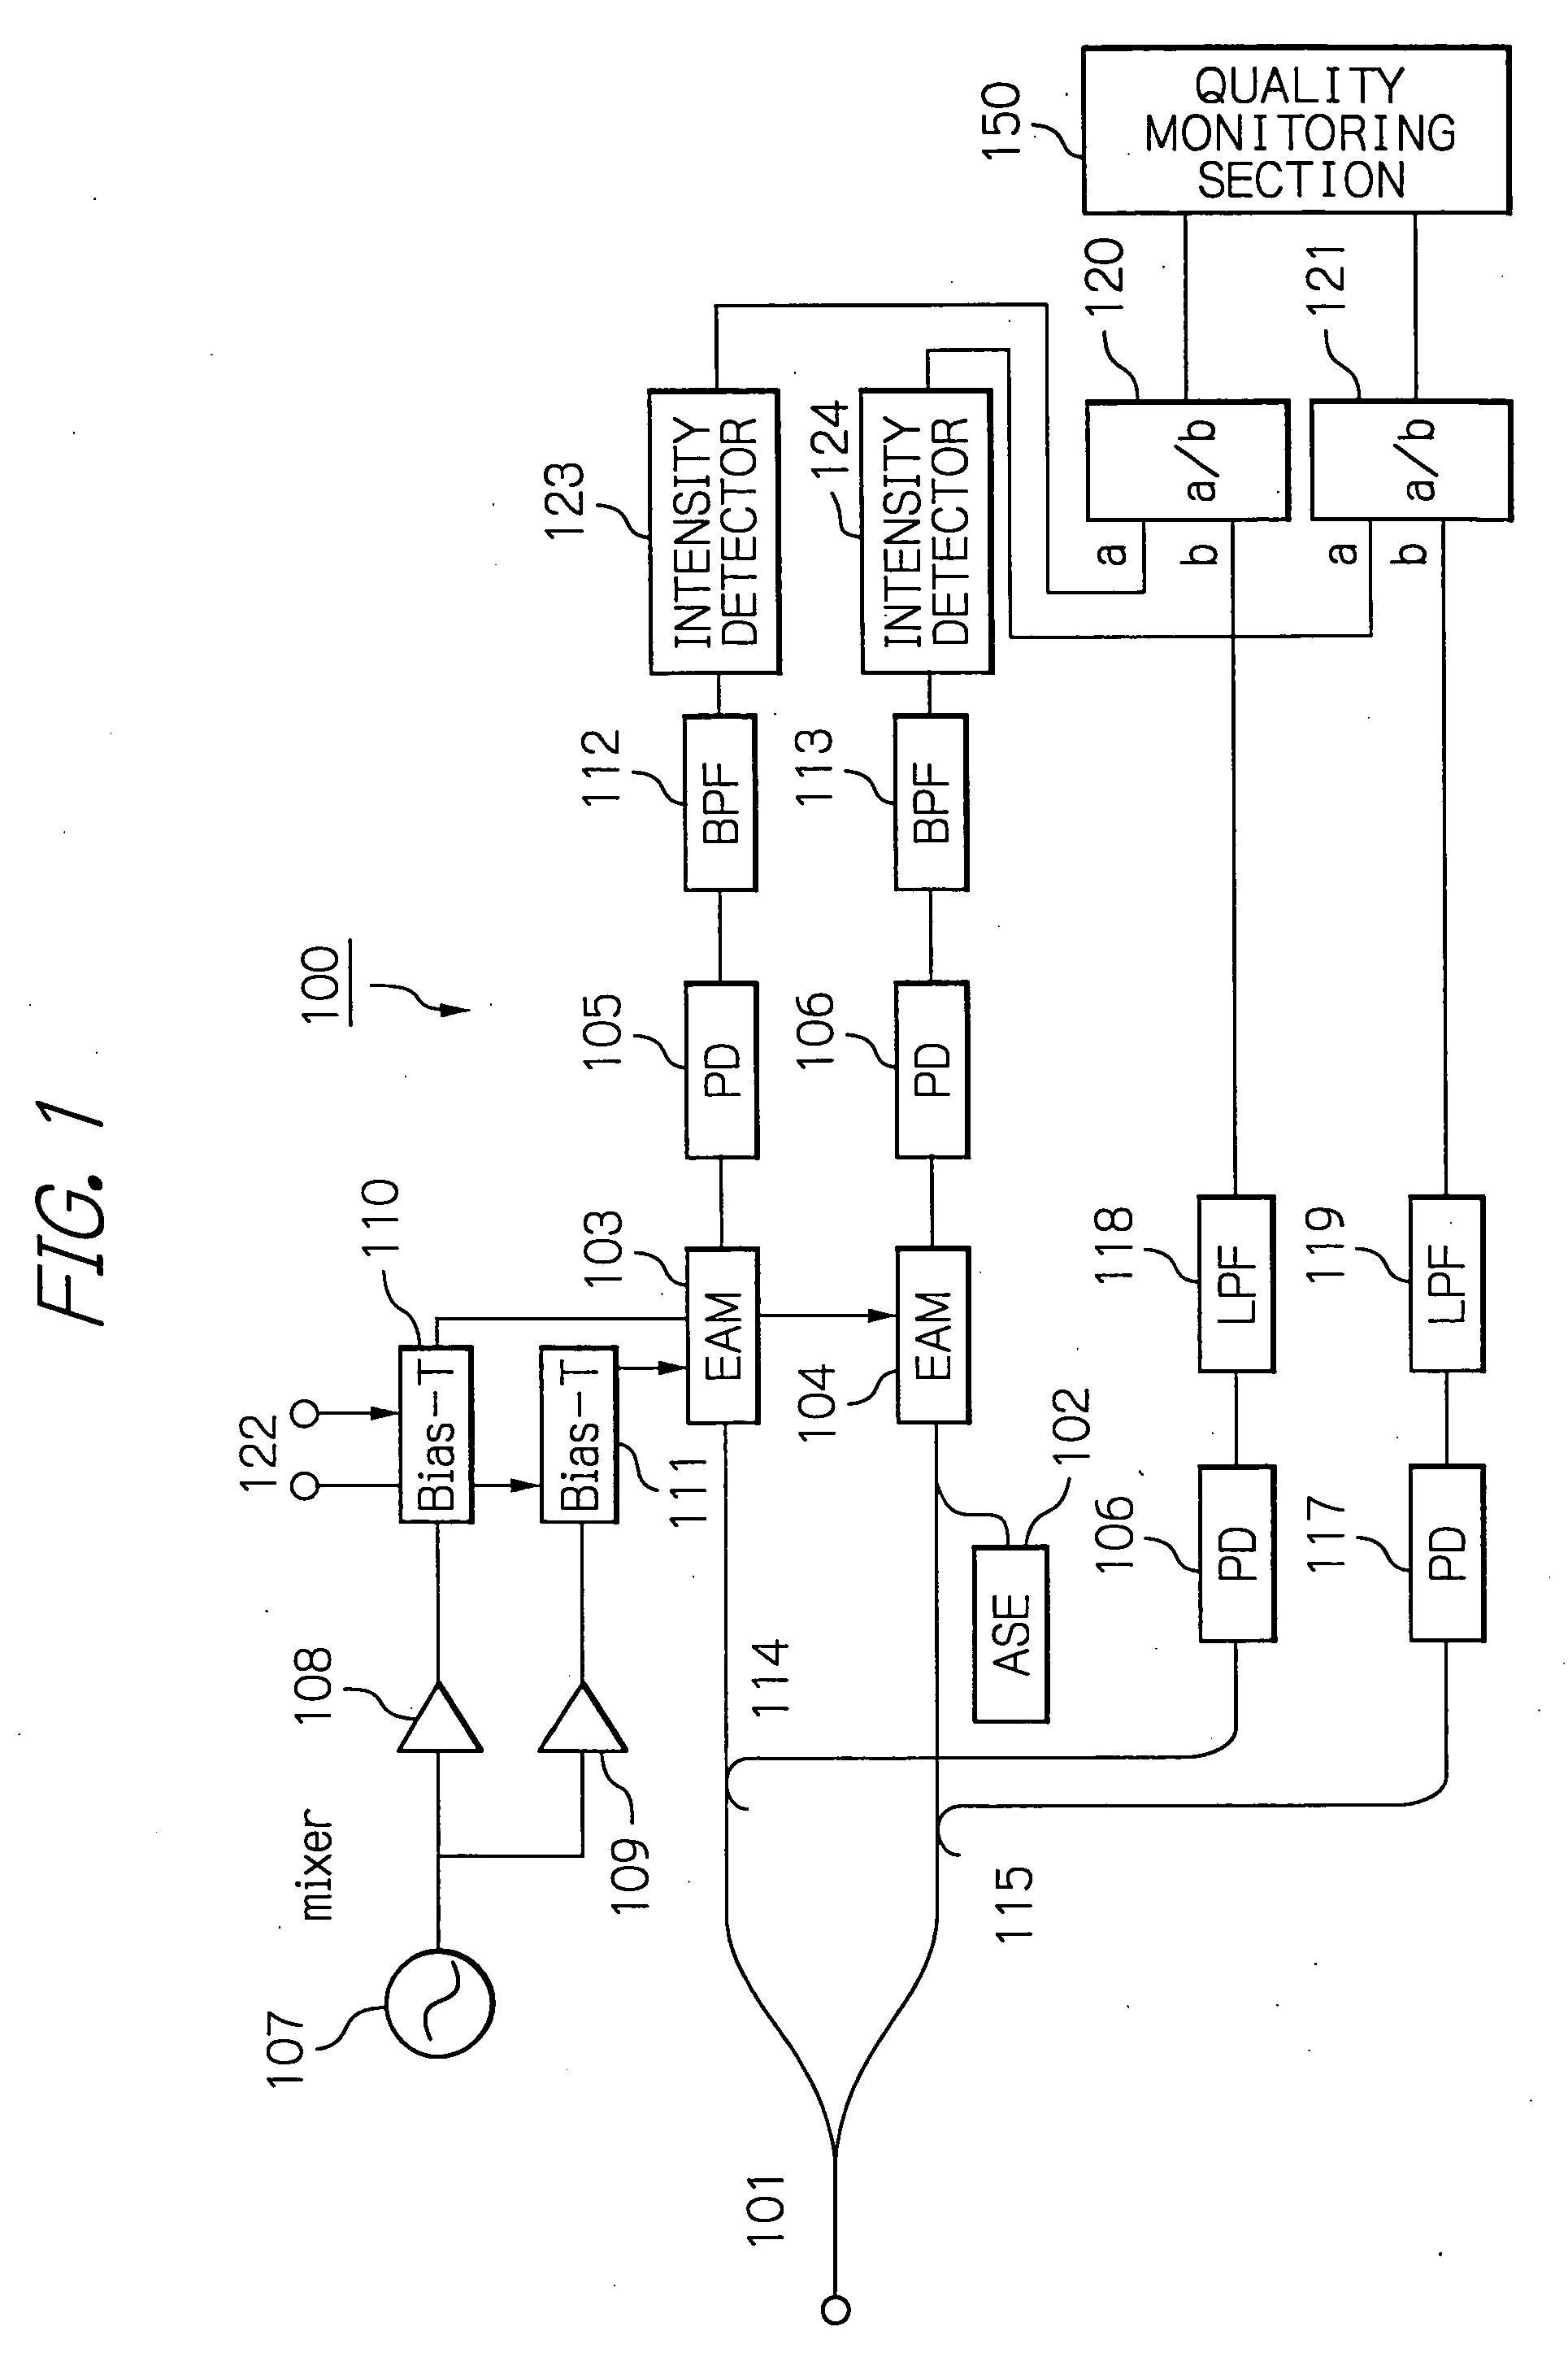 Optical signal quality monitor for a high-bit rate signal